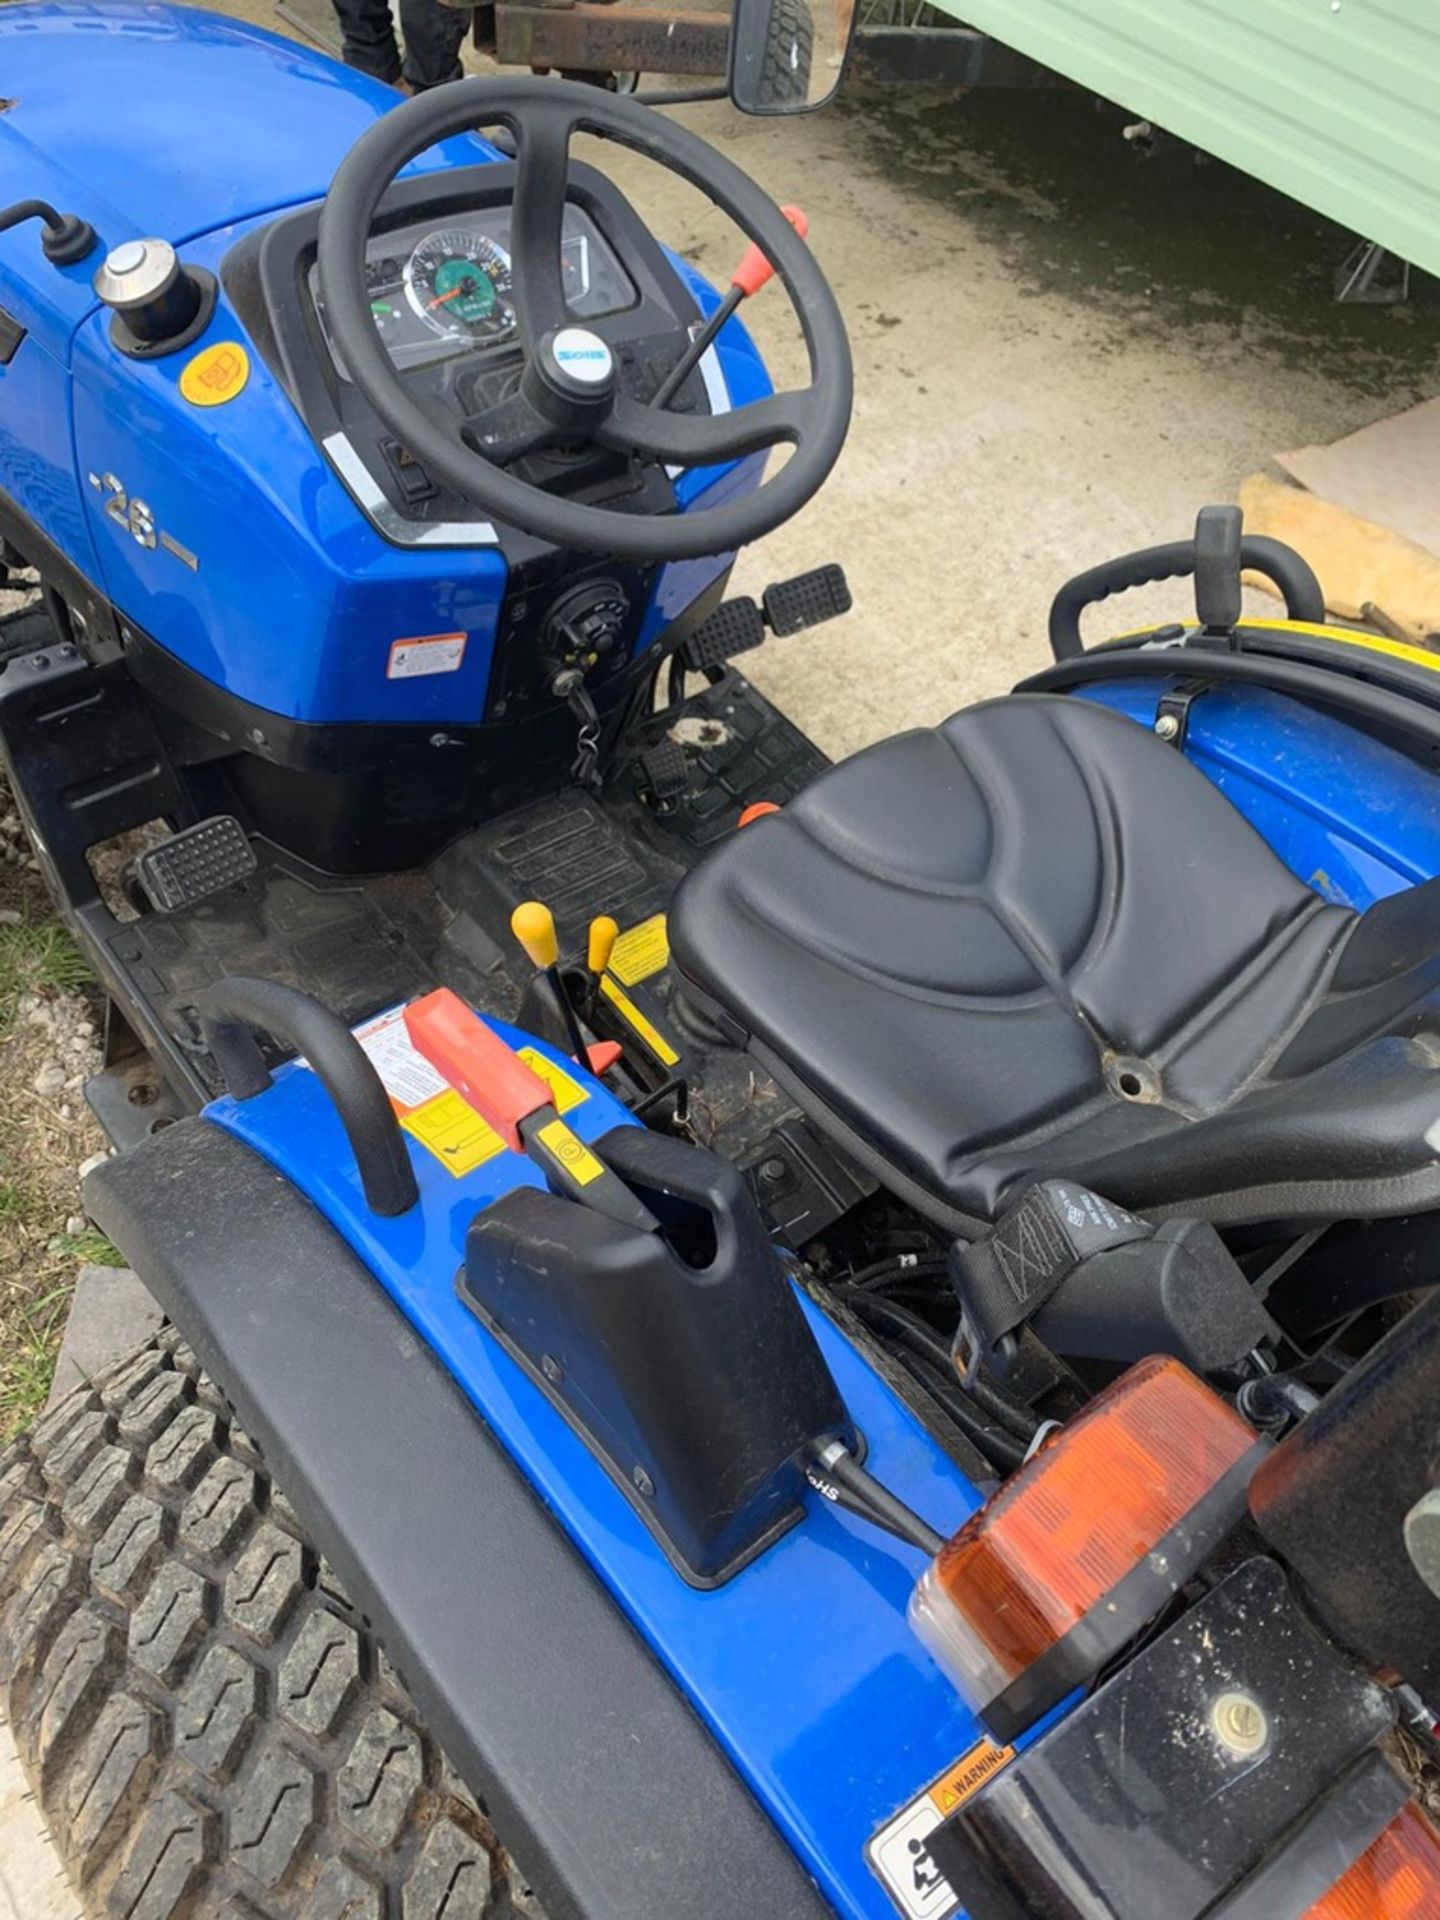 2018 Solis 26 Compact Tractor (53 Hours) on Grassland Tyres and Folding Roll Bar - Image 3 of 7